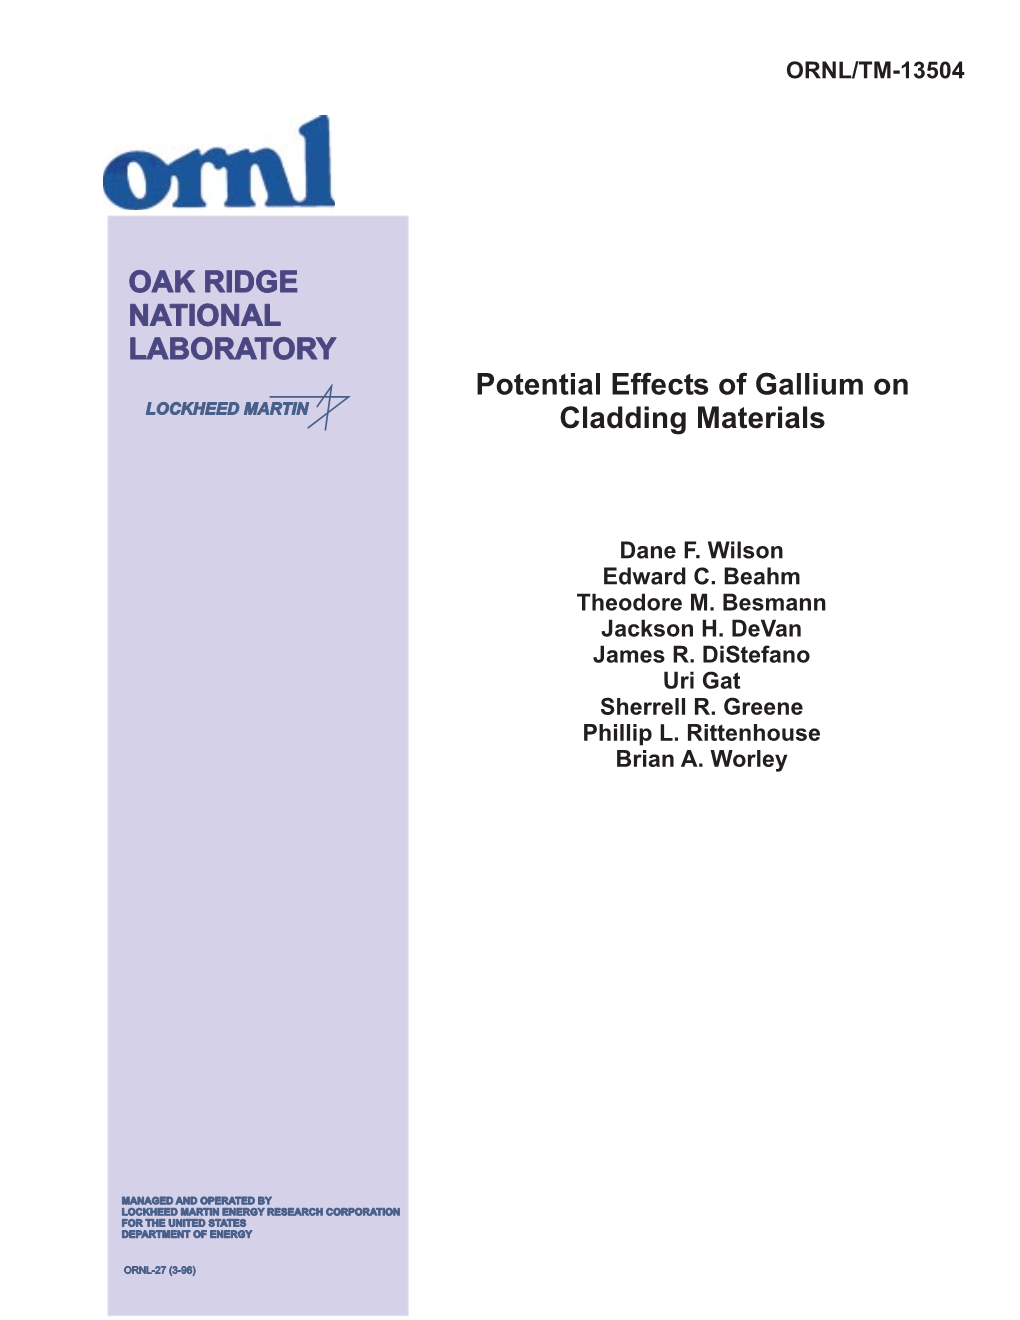 Potential Effects of Gallium on Cladding Materials